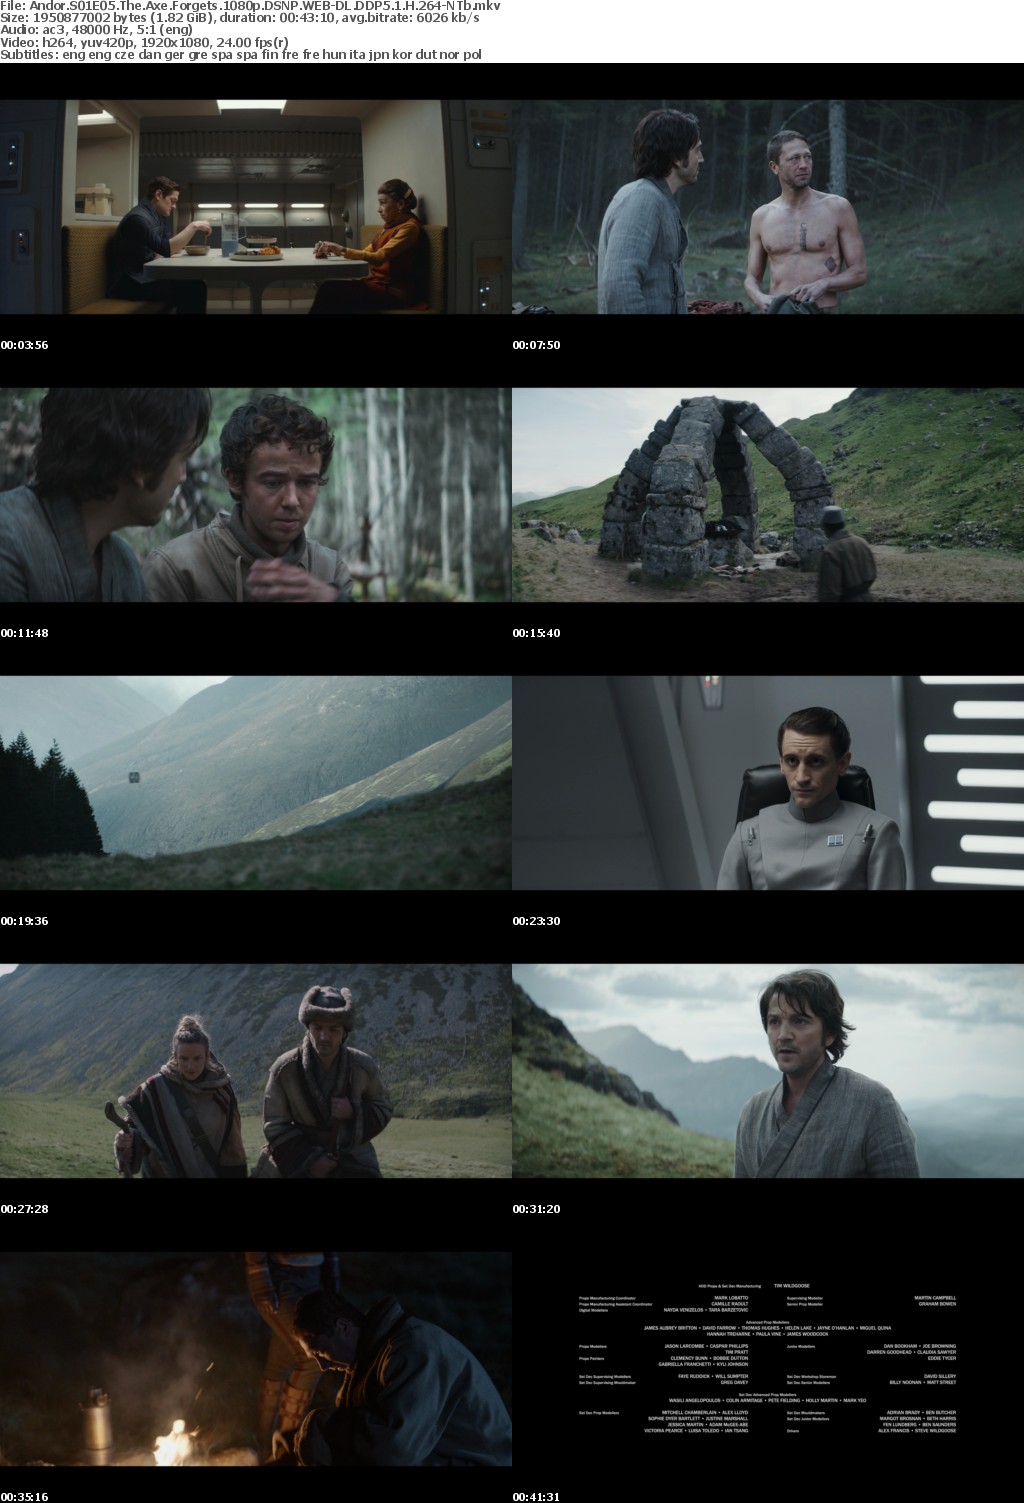 Andor S01E05 The Axe Forgets 1080p DSNP WEB-DL DDP5 1 H 264-NTb